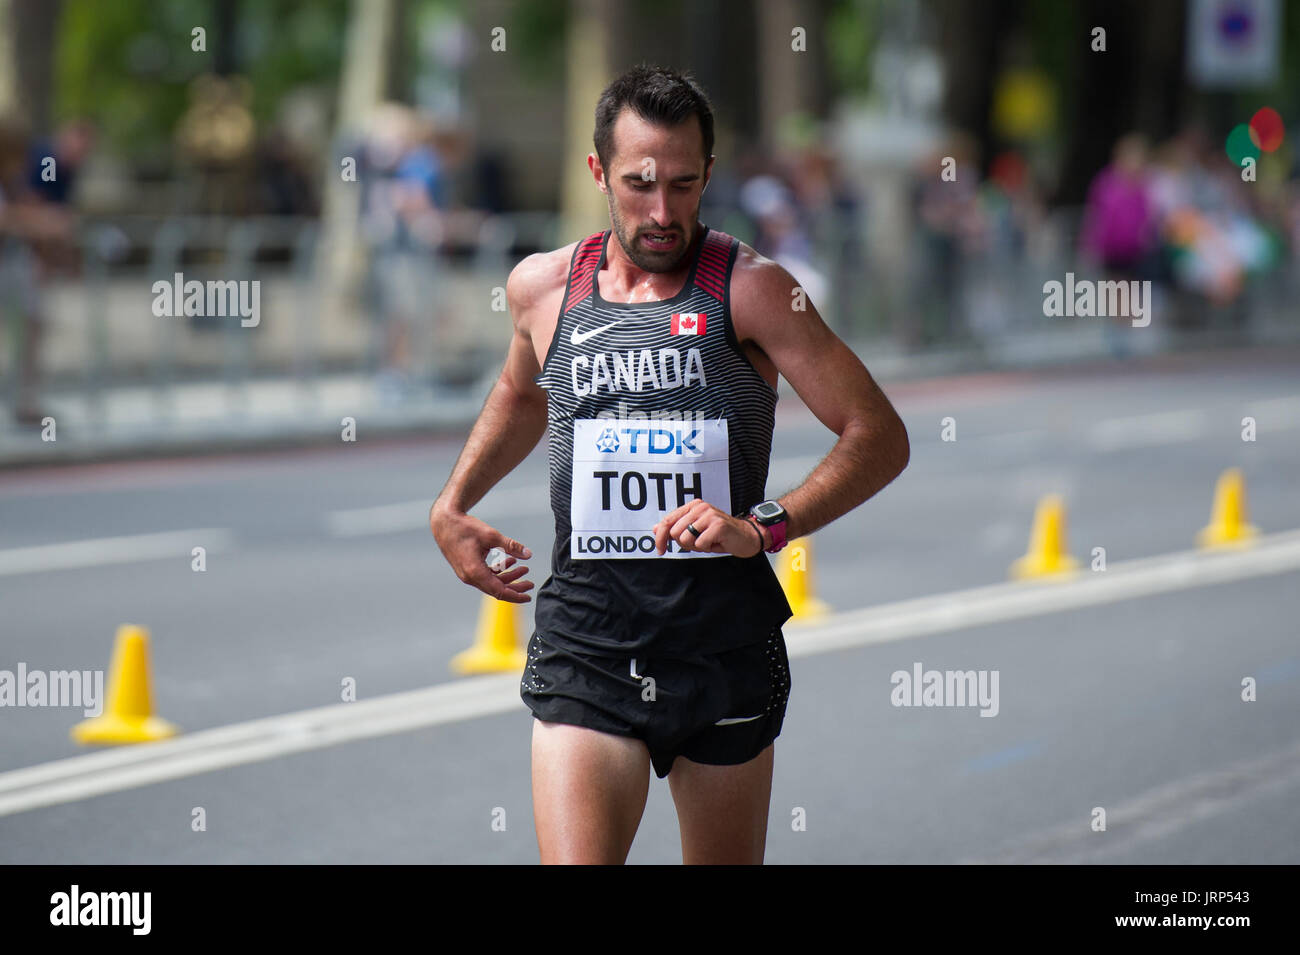 London, UK. 6th August, 2017. Thomas Toth (Canada) at the IAAF World Athletics Championships Men's Marathon Race Credit: Phil Swallow Photography/Alamy Live News Stock Photo